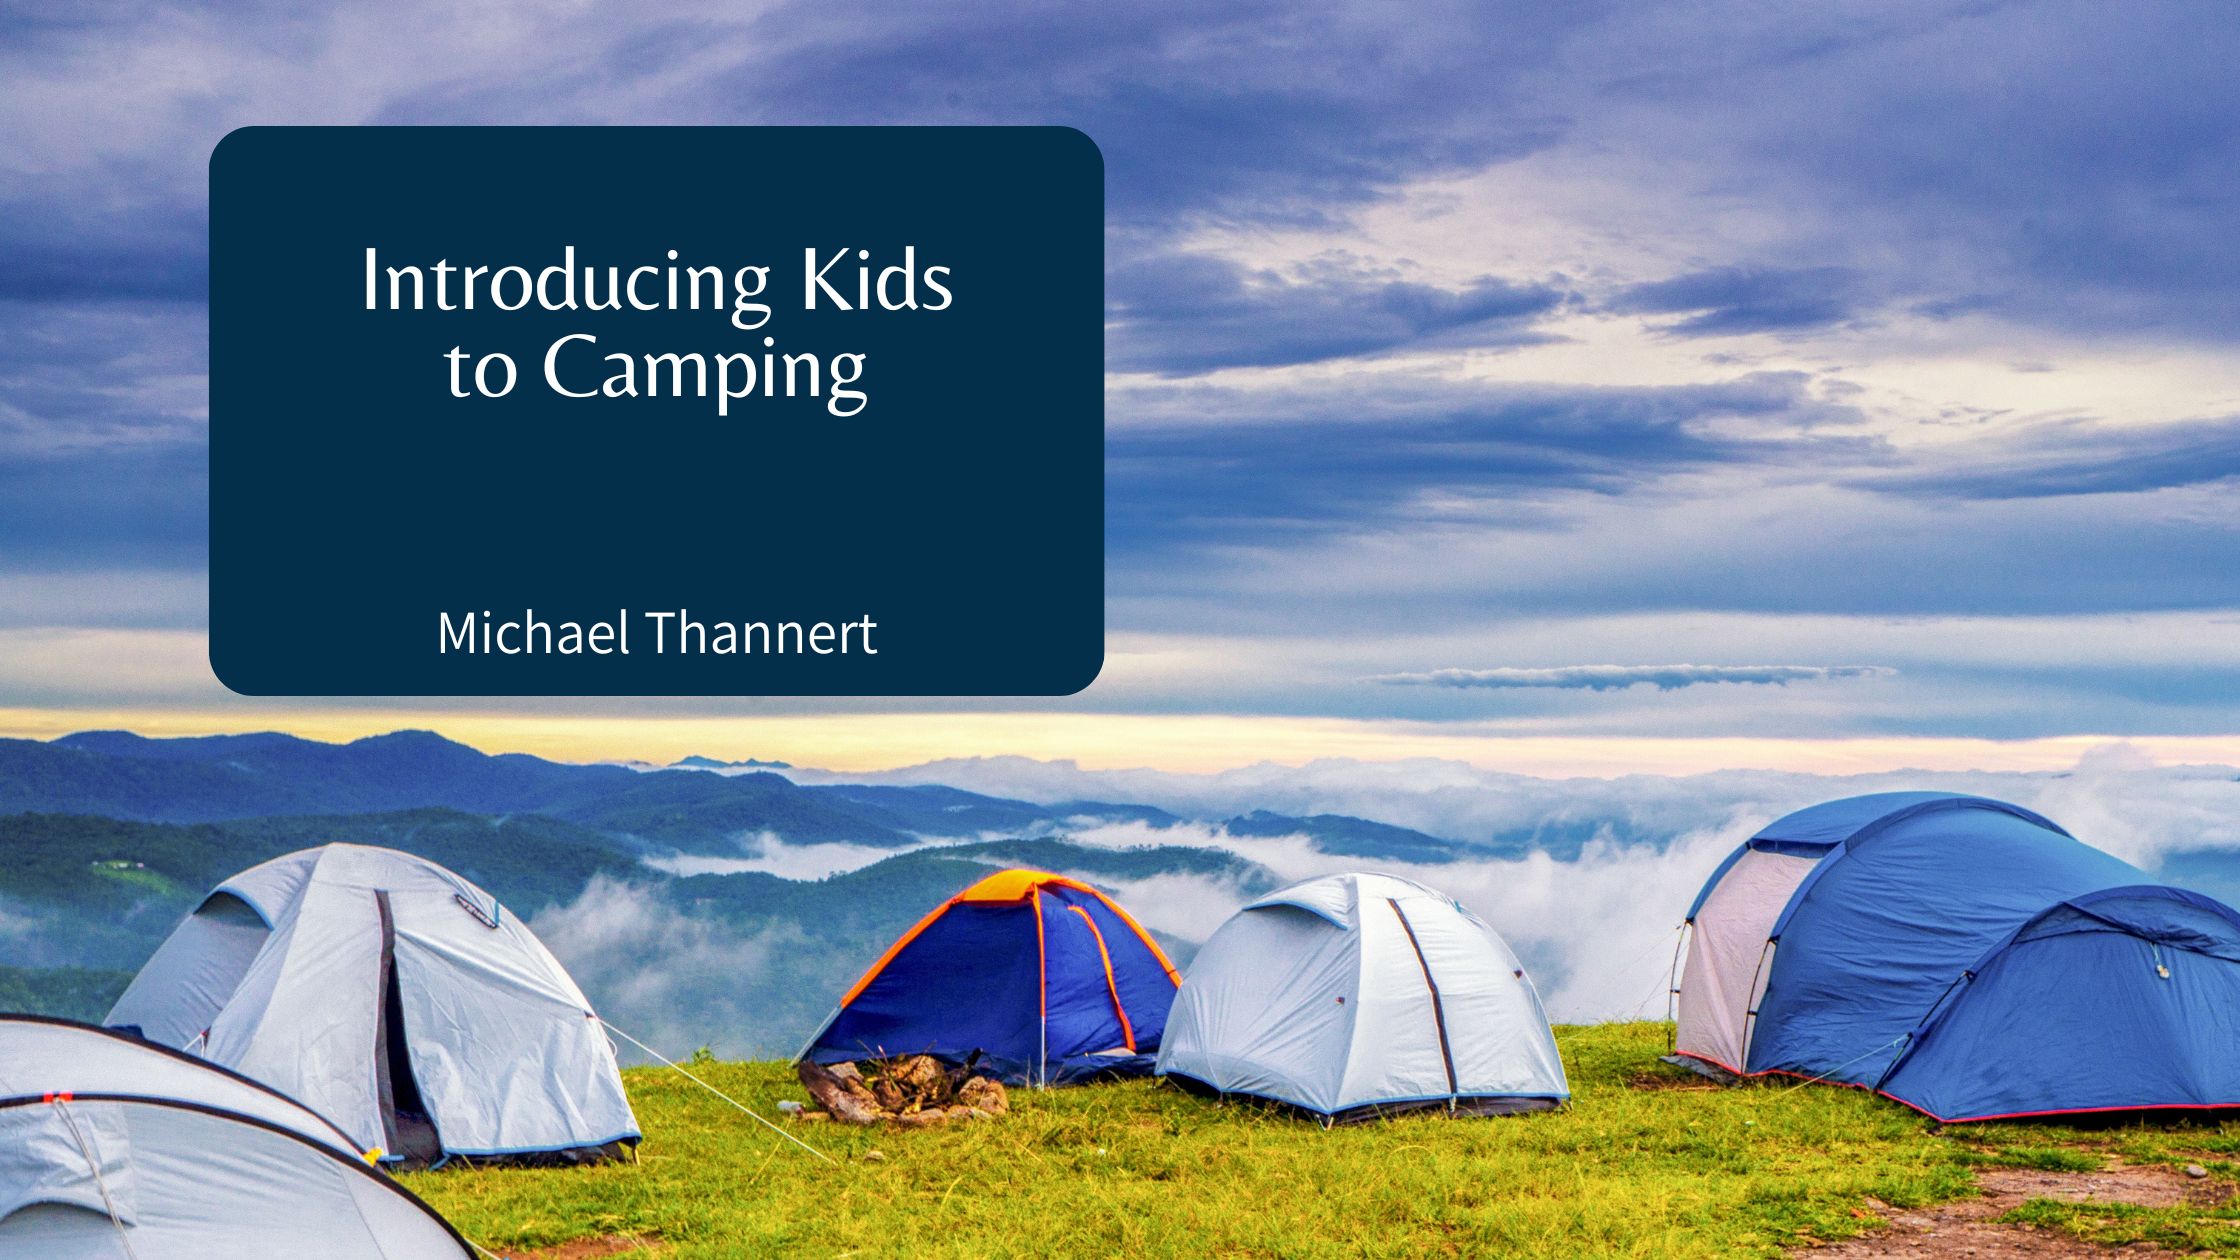 Introducing Kids to Camping